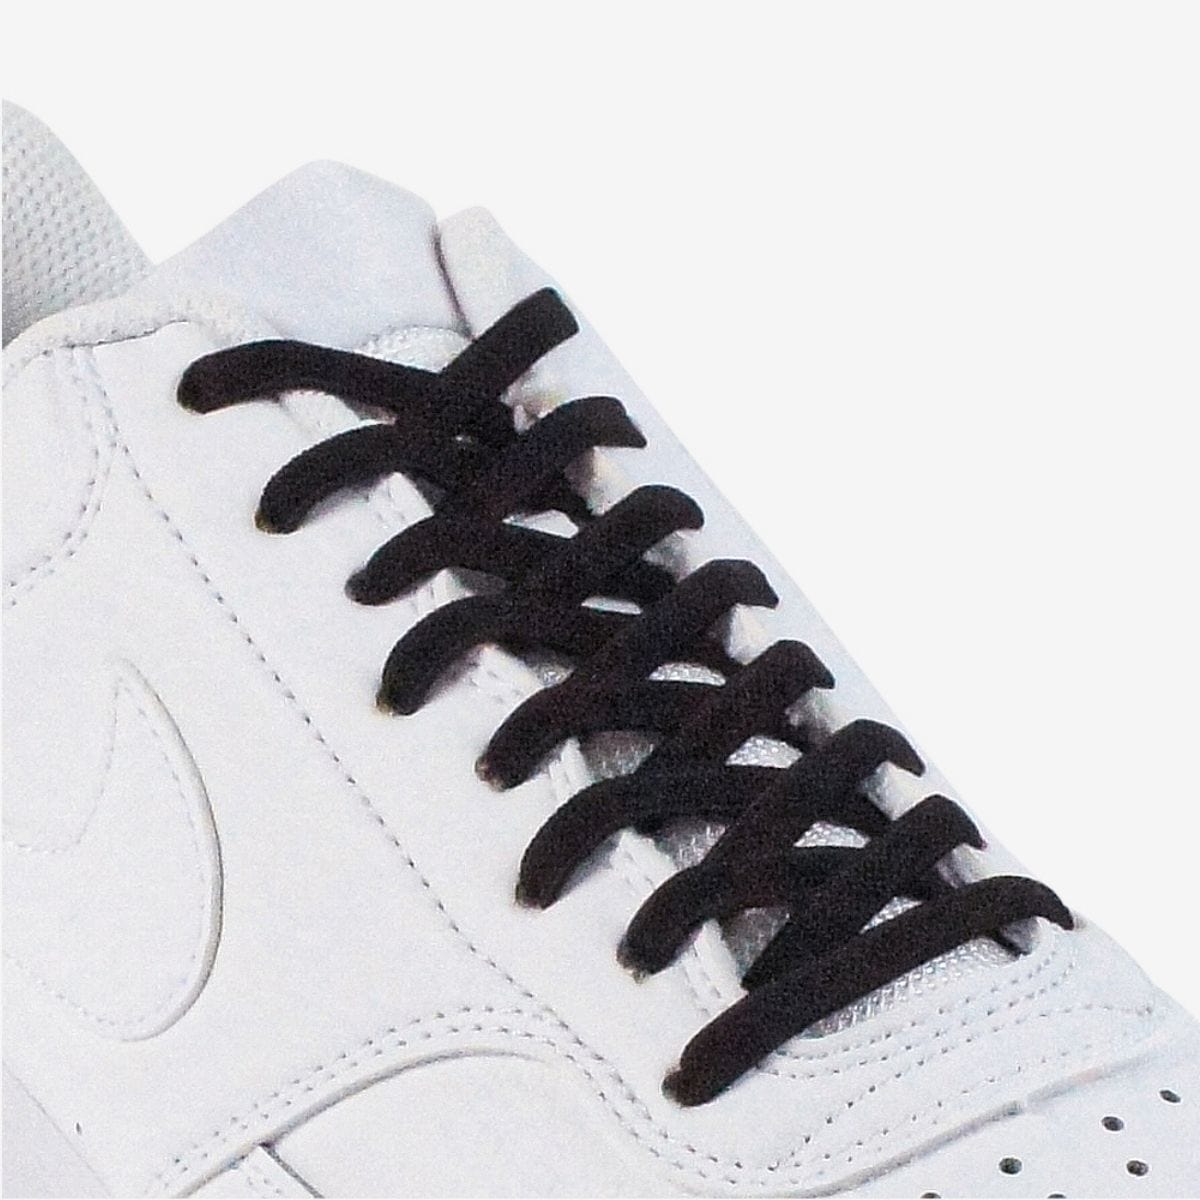 kids-no-tie-shoelaces-with-black-laces-on-nike-white-sneakers-by-kicks-shoelaces